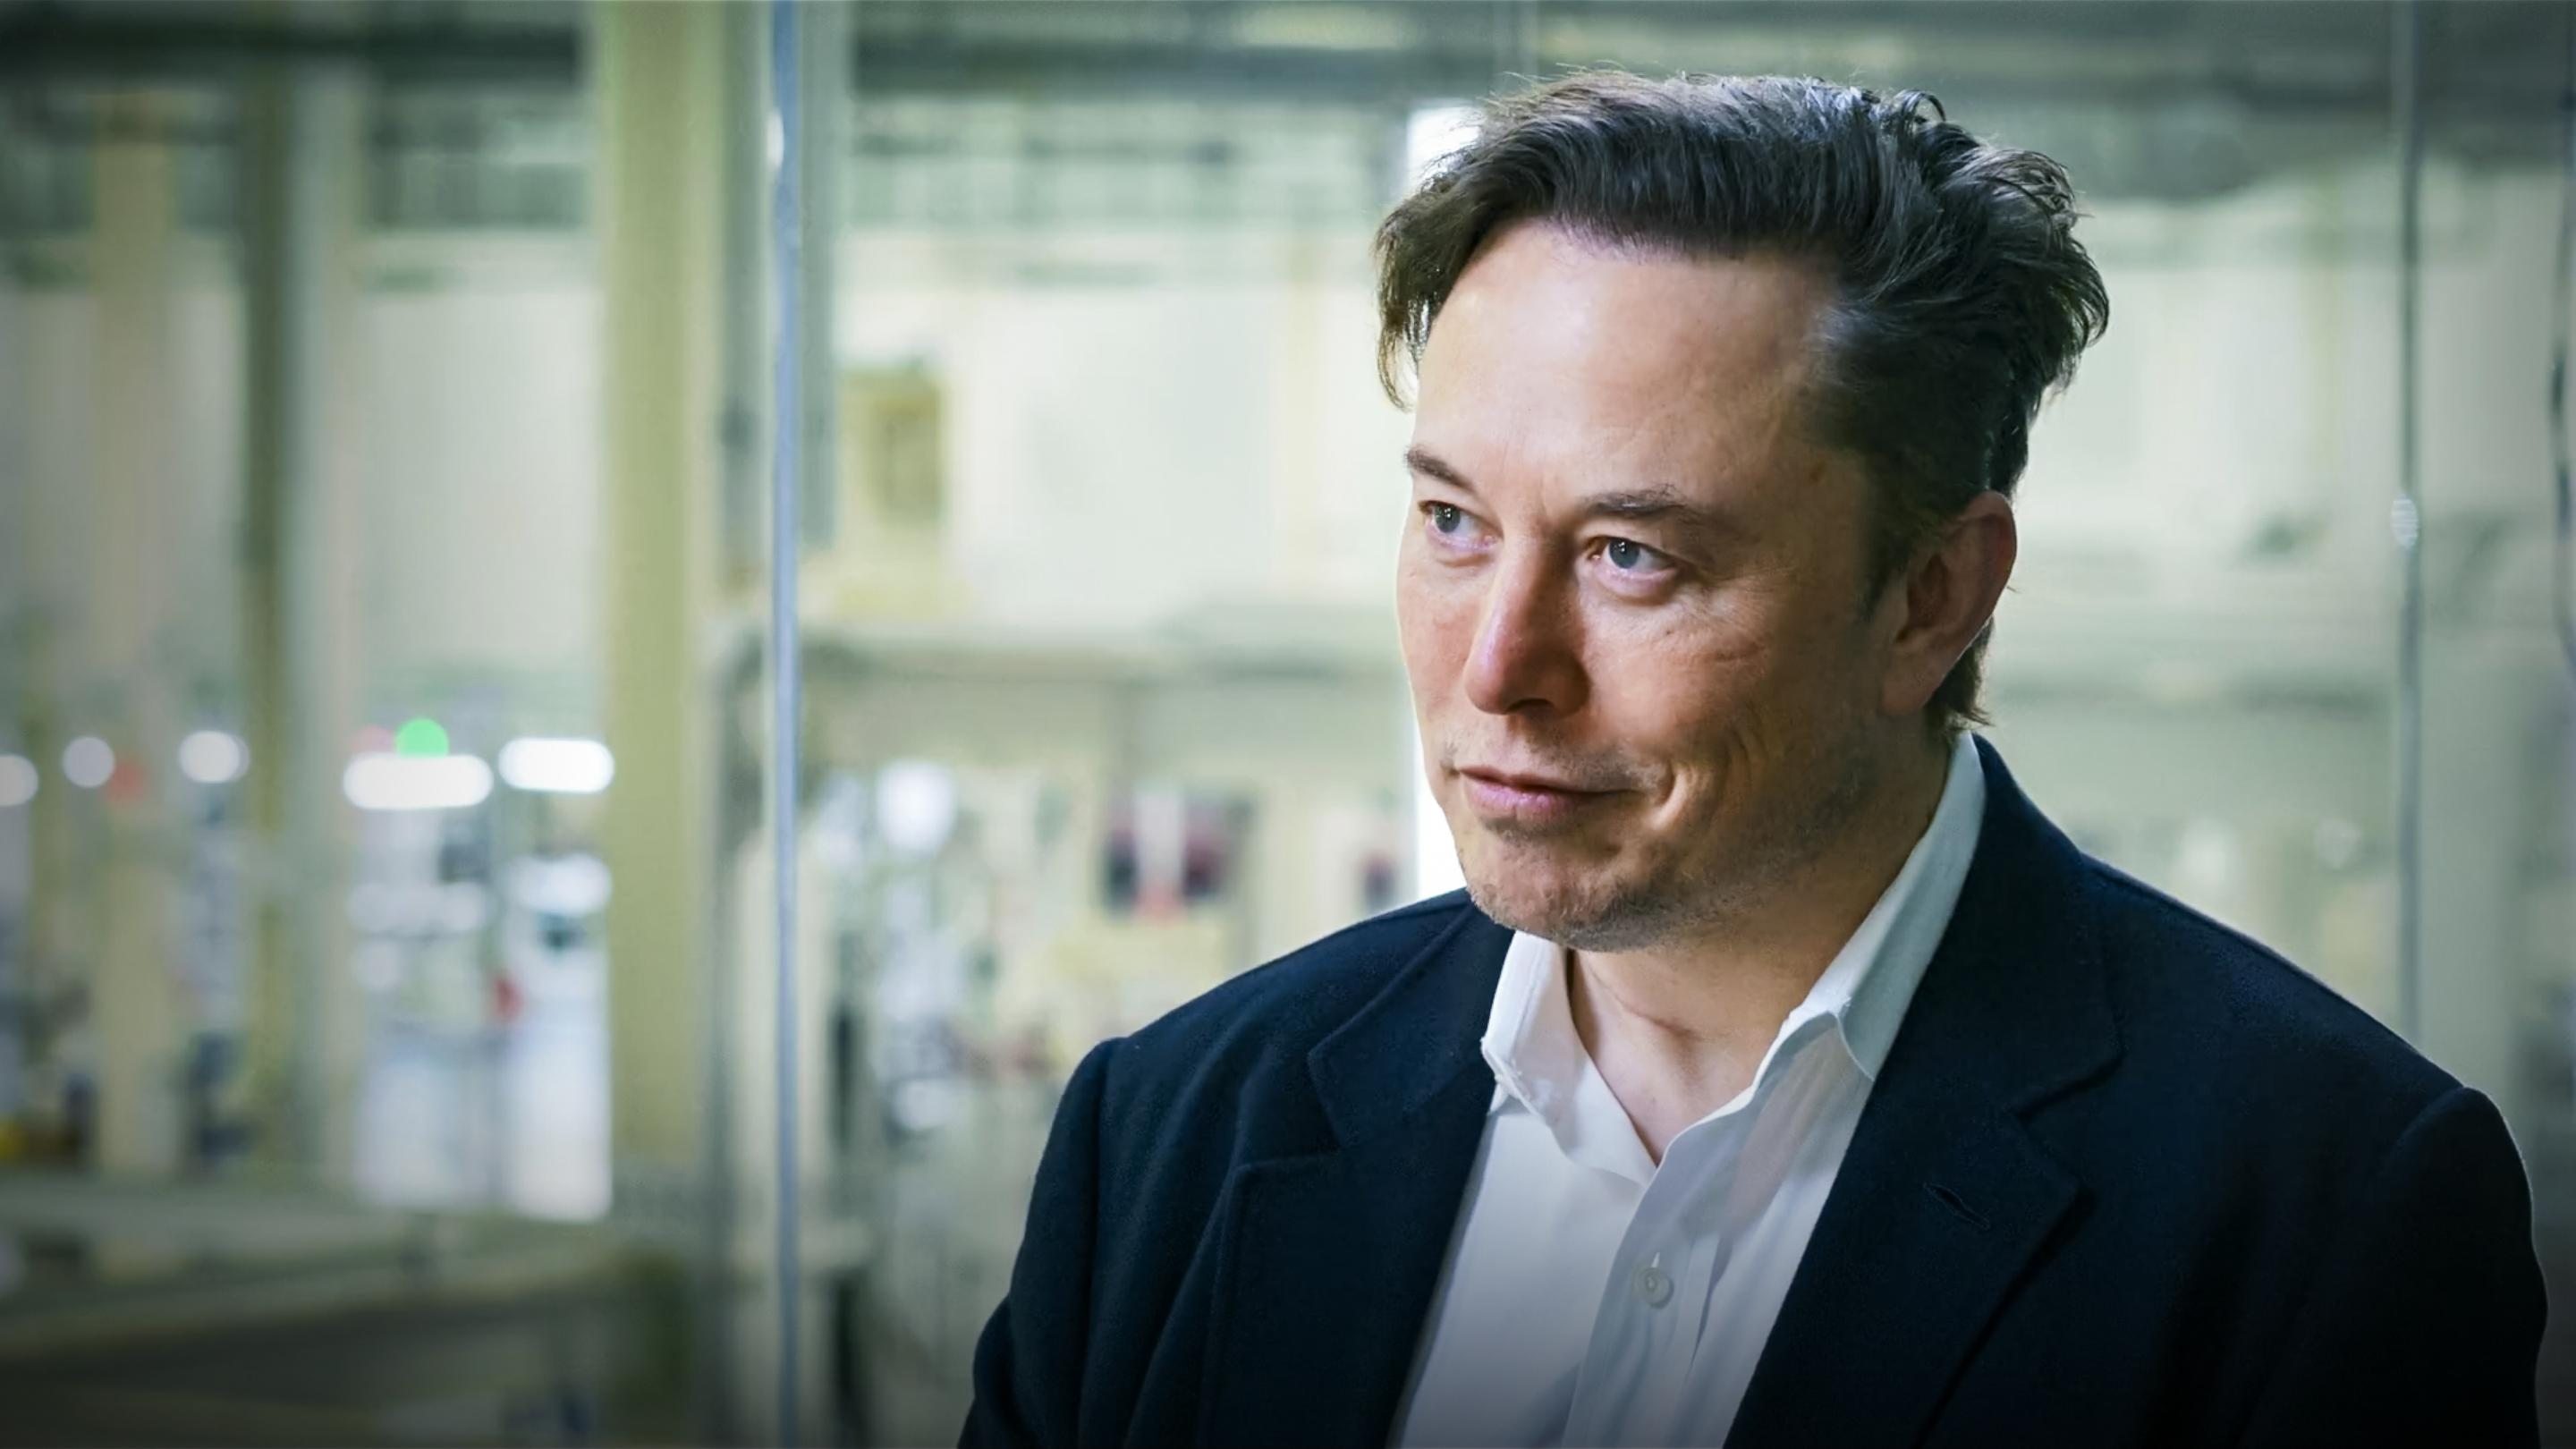 An idea from TED by Elon Musk entitled A future worth getting excited about